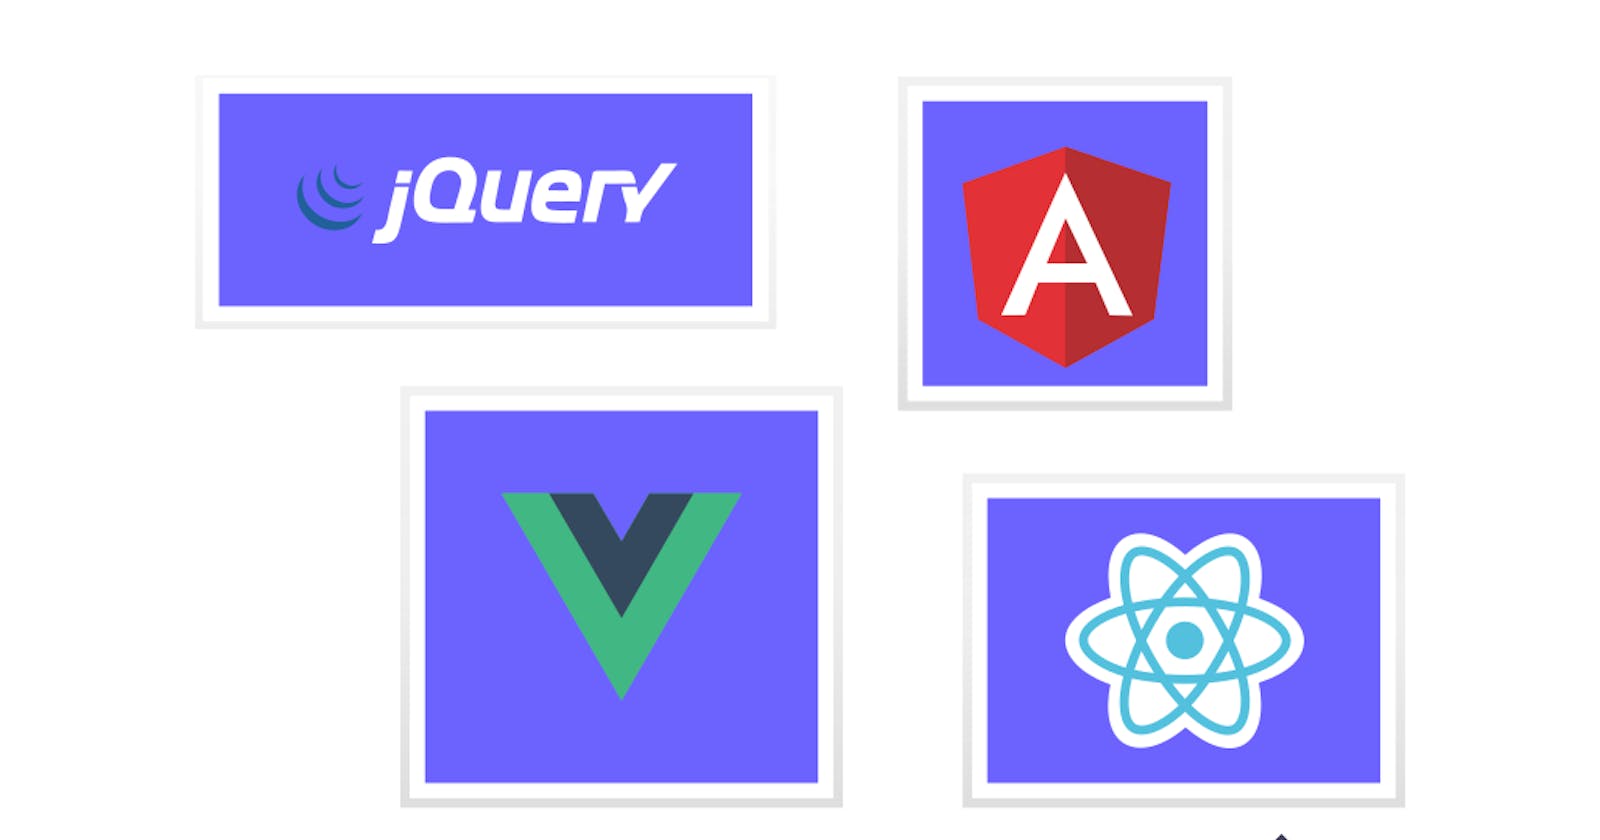 You want to learn JavaScript but don't know where to get started?